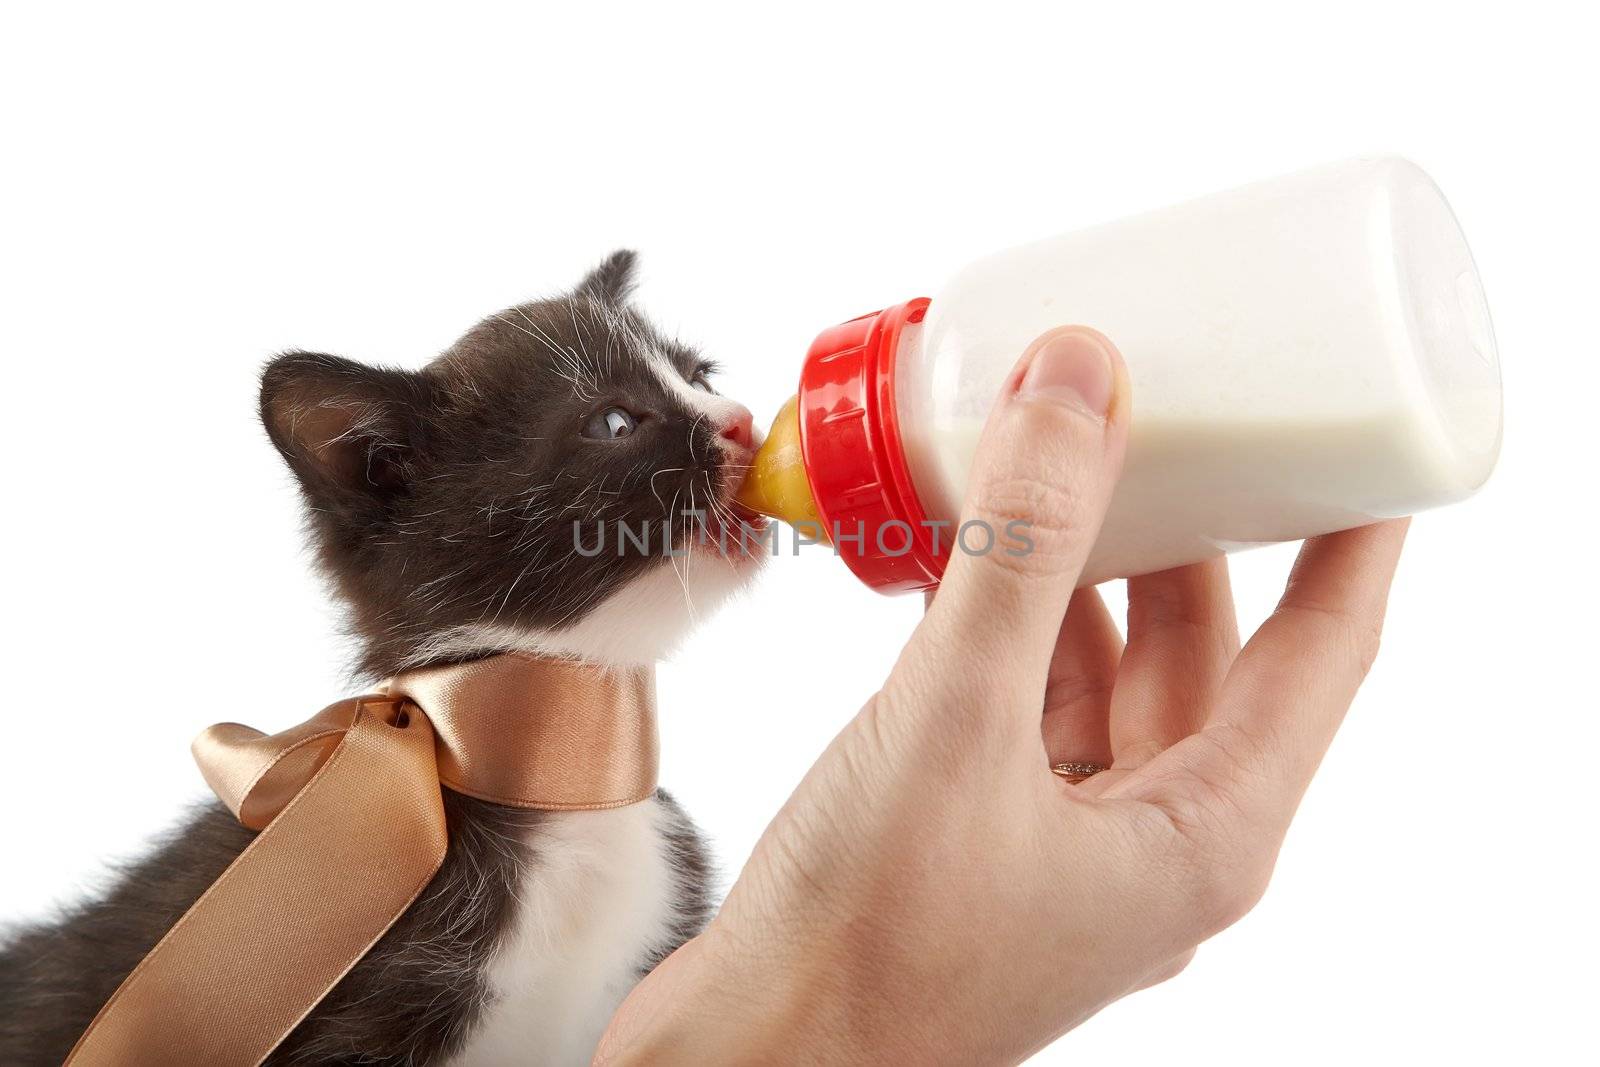 Feeding of a kitten from a small bottle on a white background